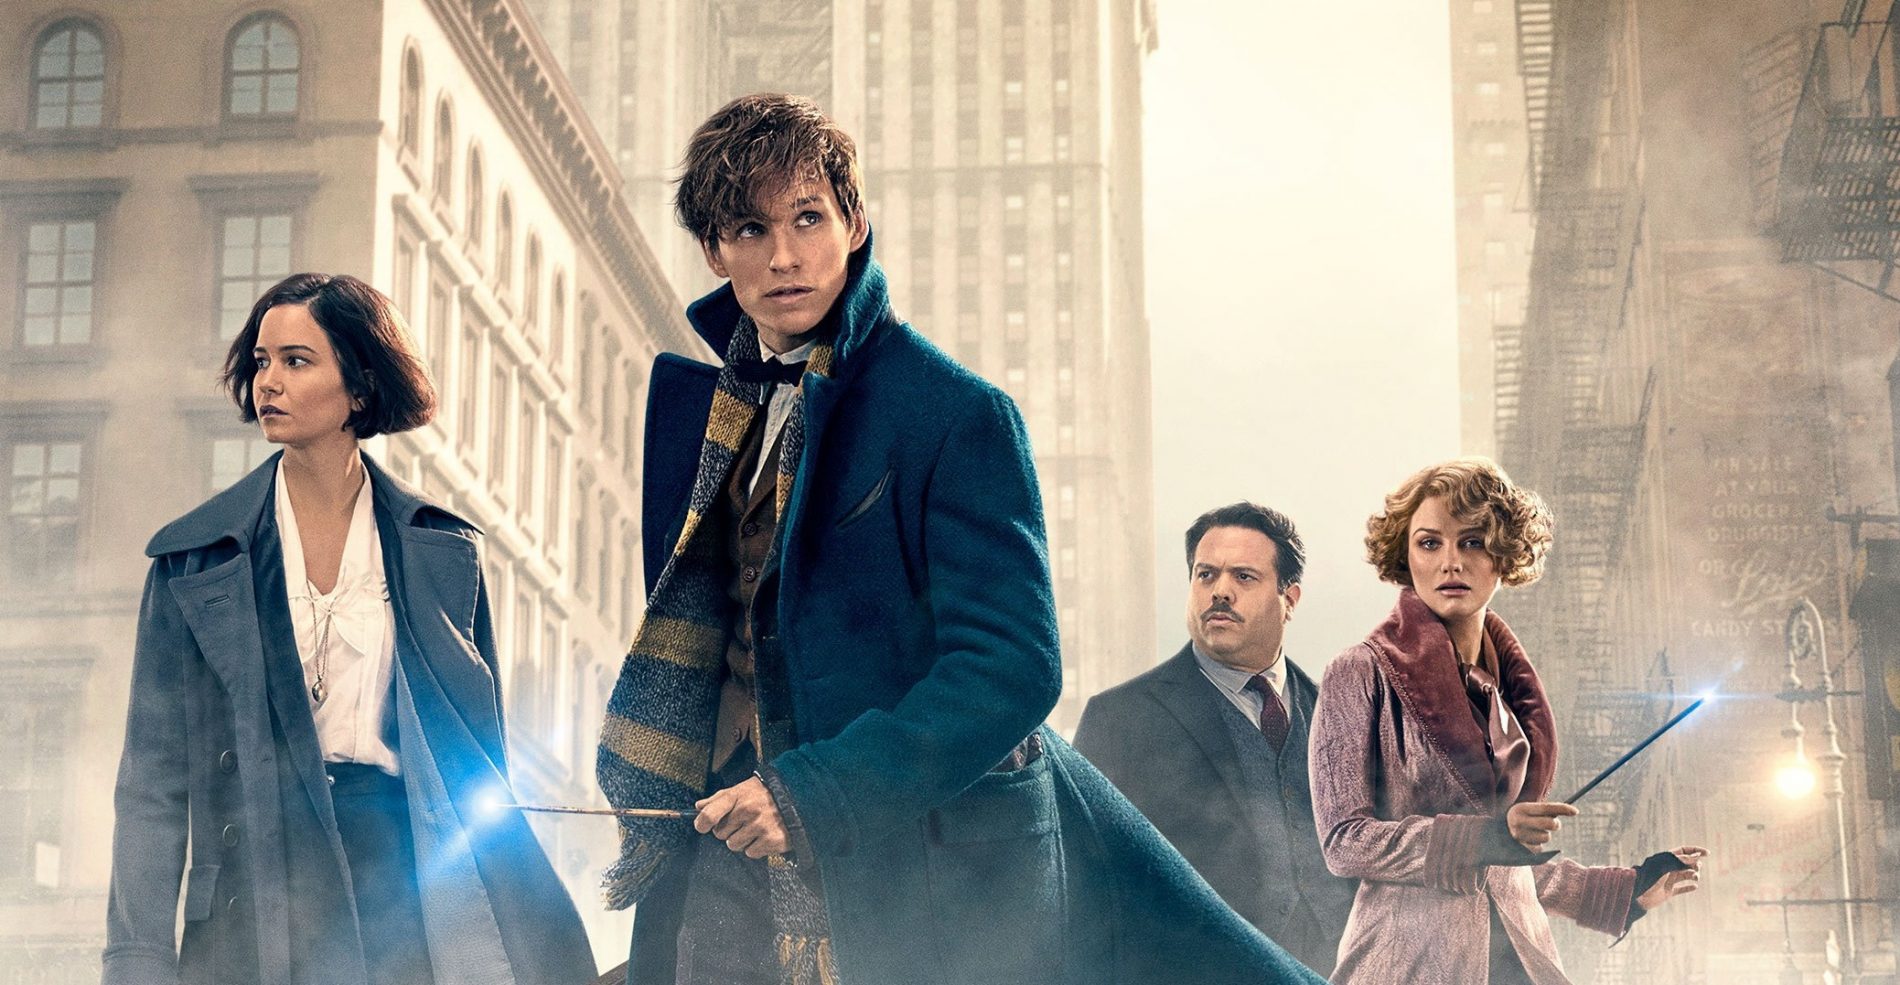 Fantastic beasts and where to find them: not a trilogy